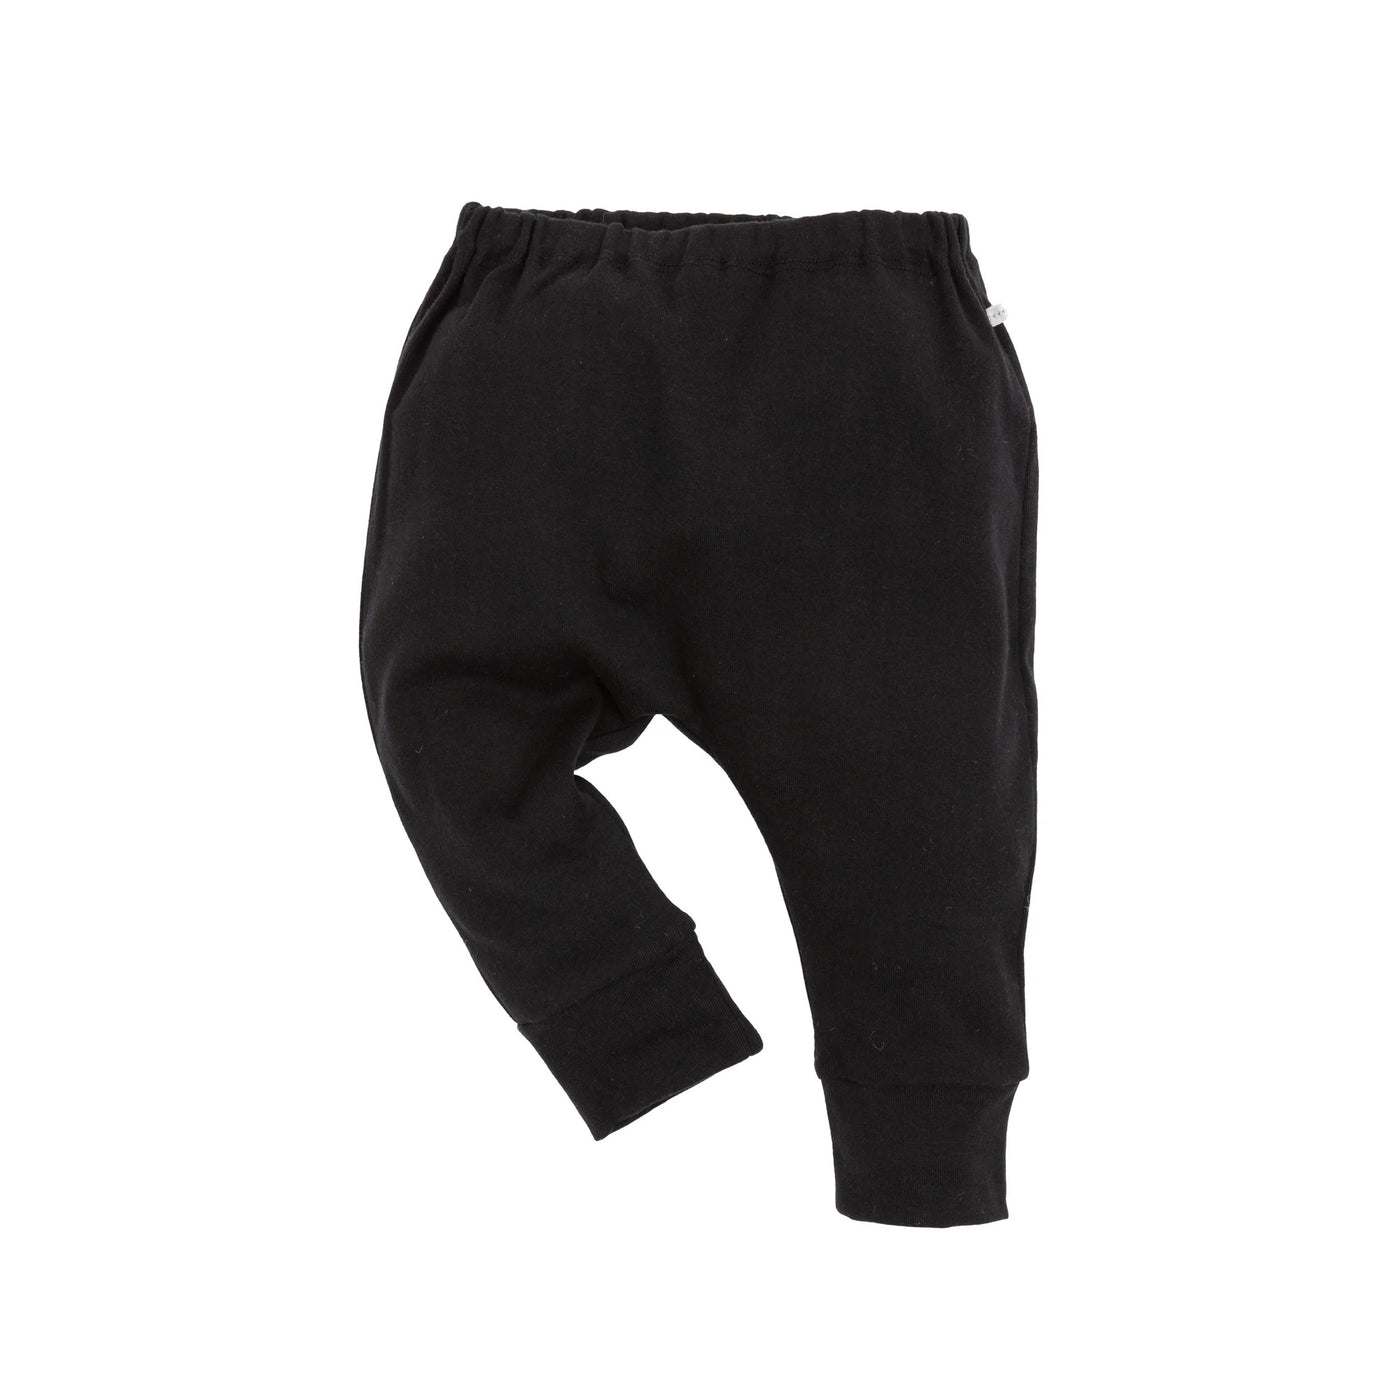 Black organic cotton baby pants for cloth diapers